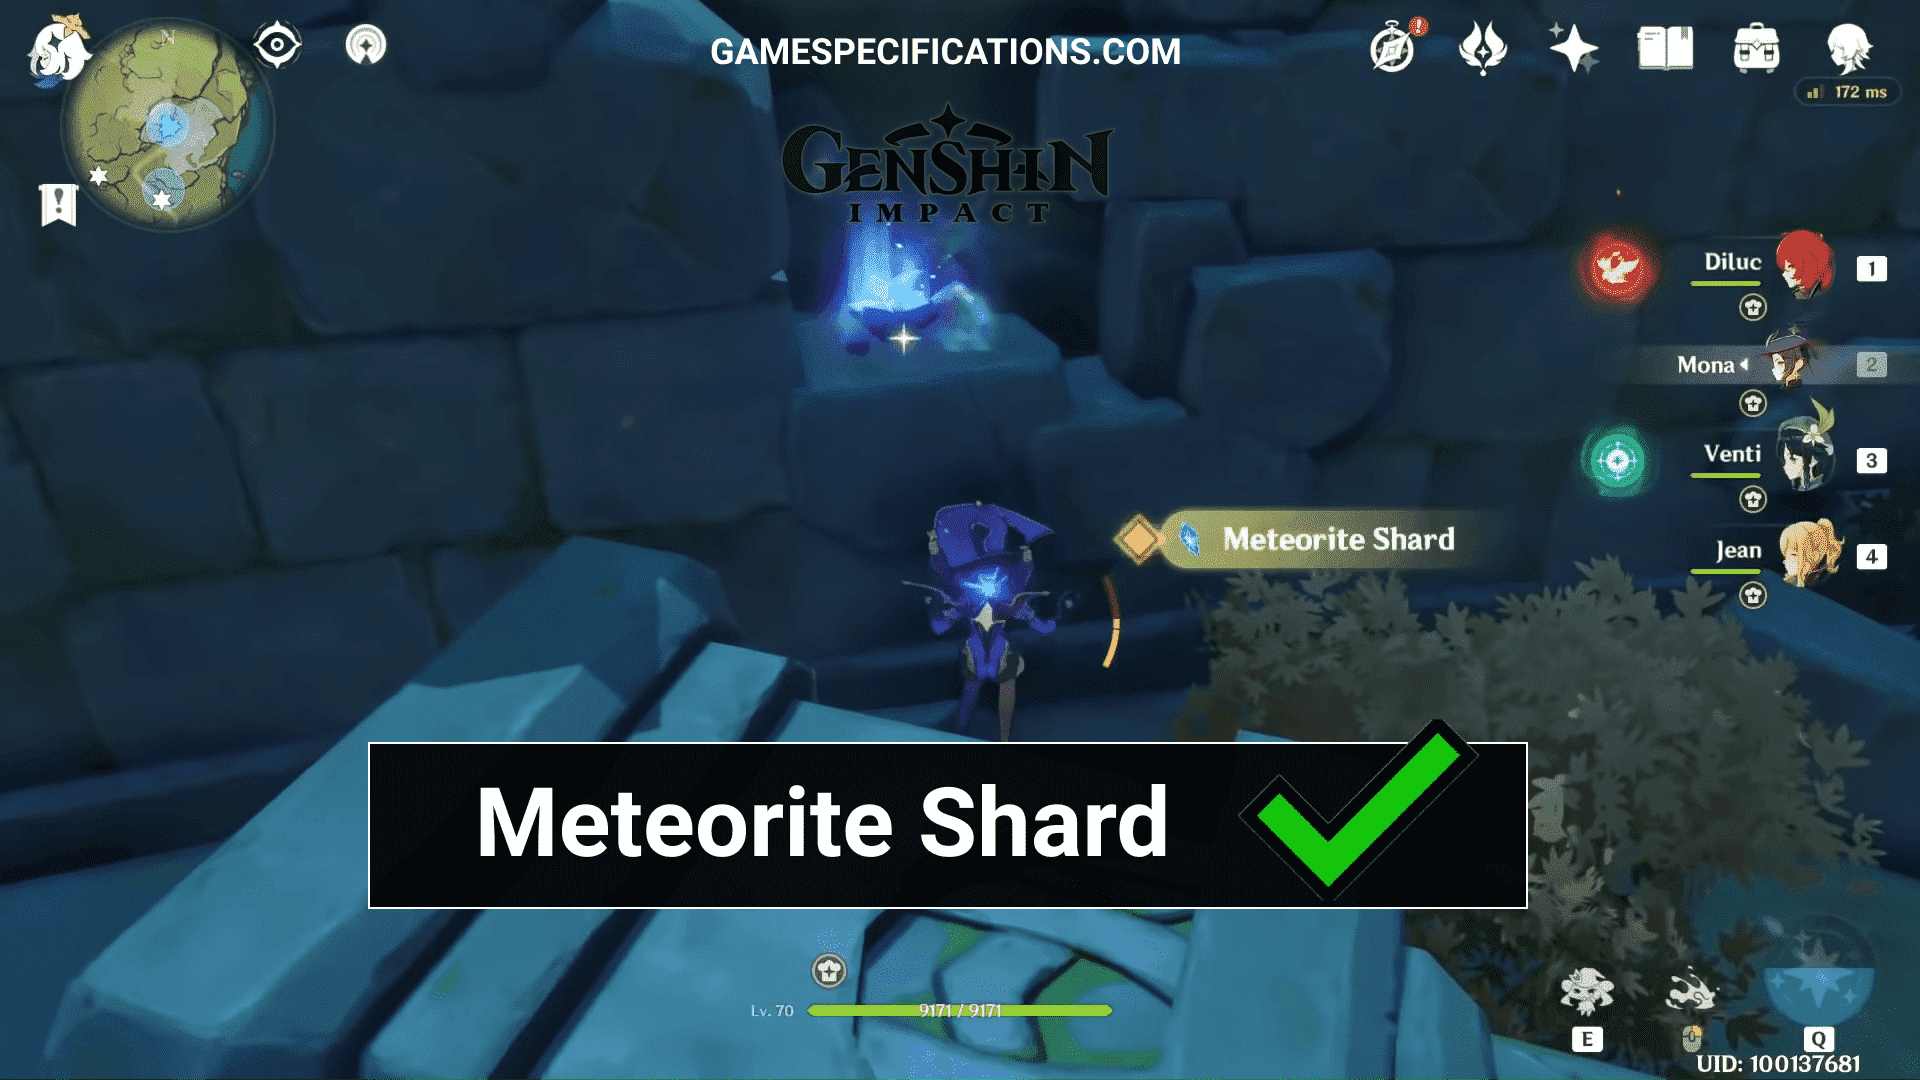 Best 6 Genshin Impact Meteorite Shard Locations That Are Easy To Navigate